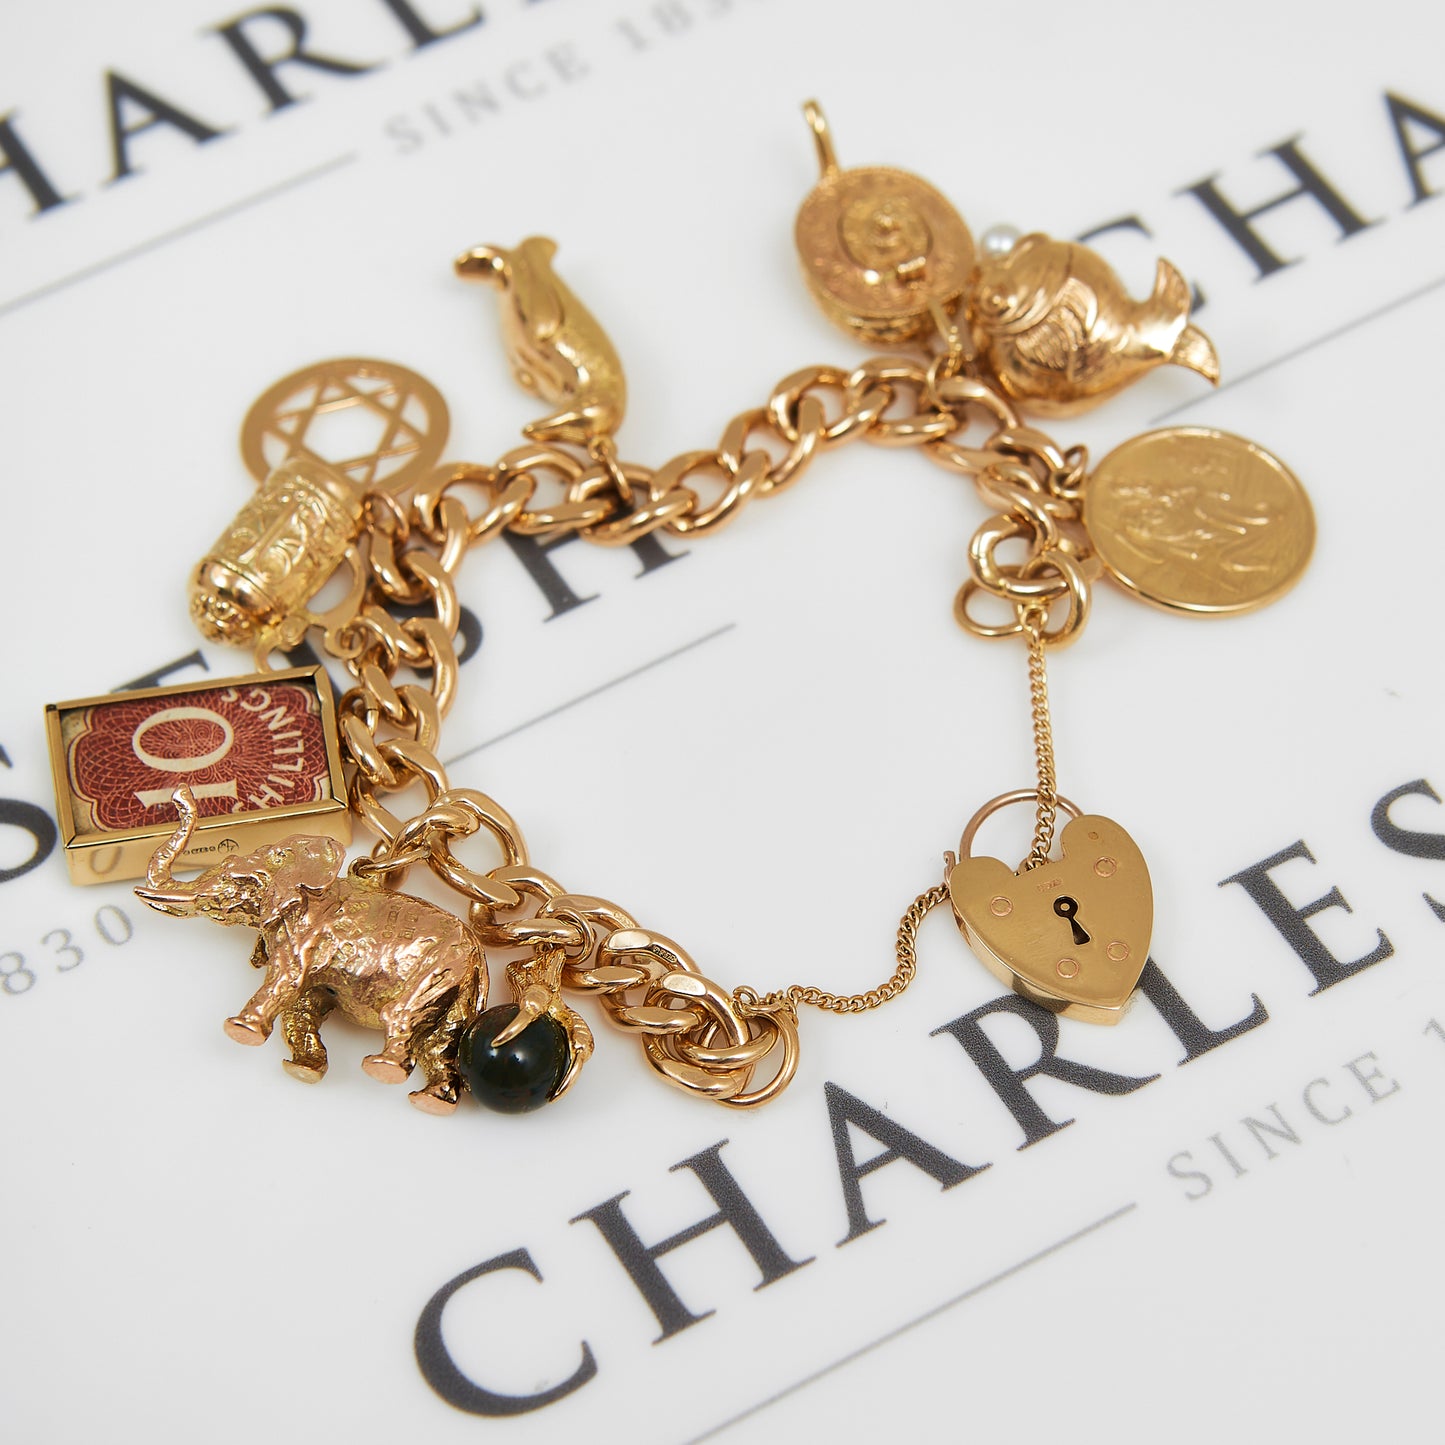 Pre-Owned 9ct Yellow Gold British Jews 9 Charm Bracelet